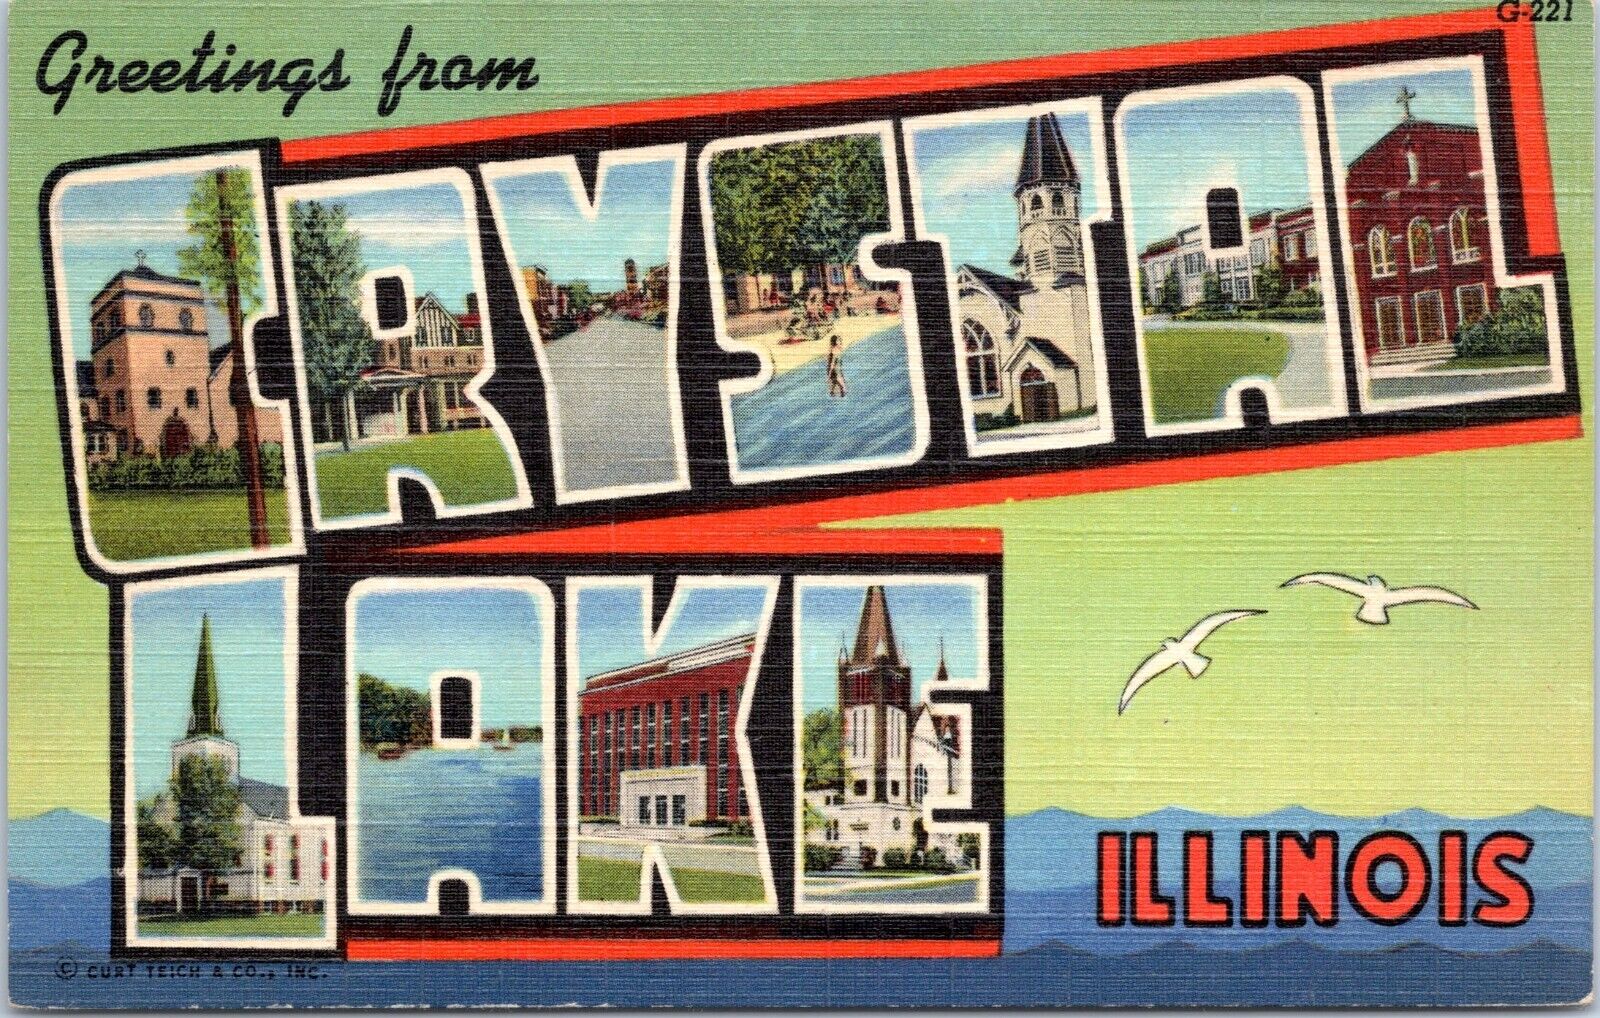 Large Letter Greetings, Crystal Lake Illinois - 1950 Linen Postcard - Curt Teich